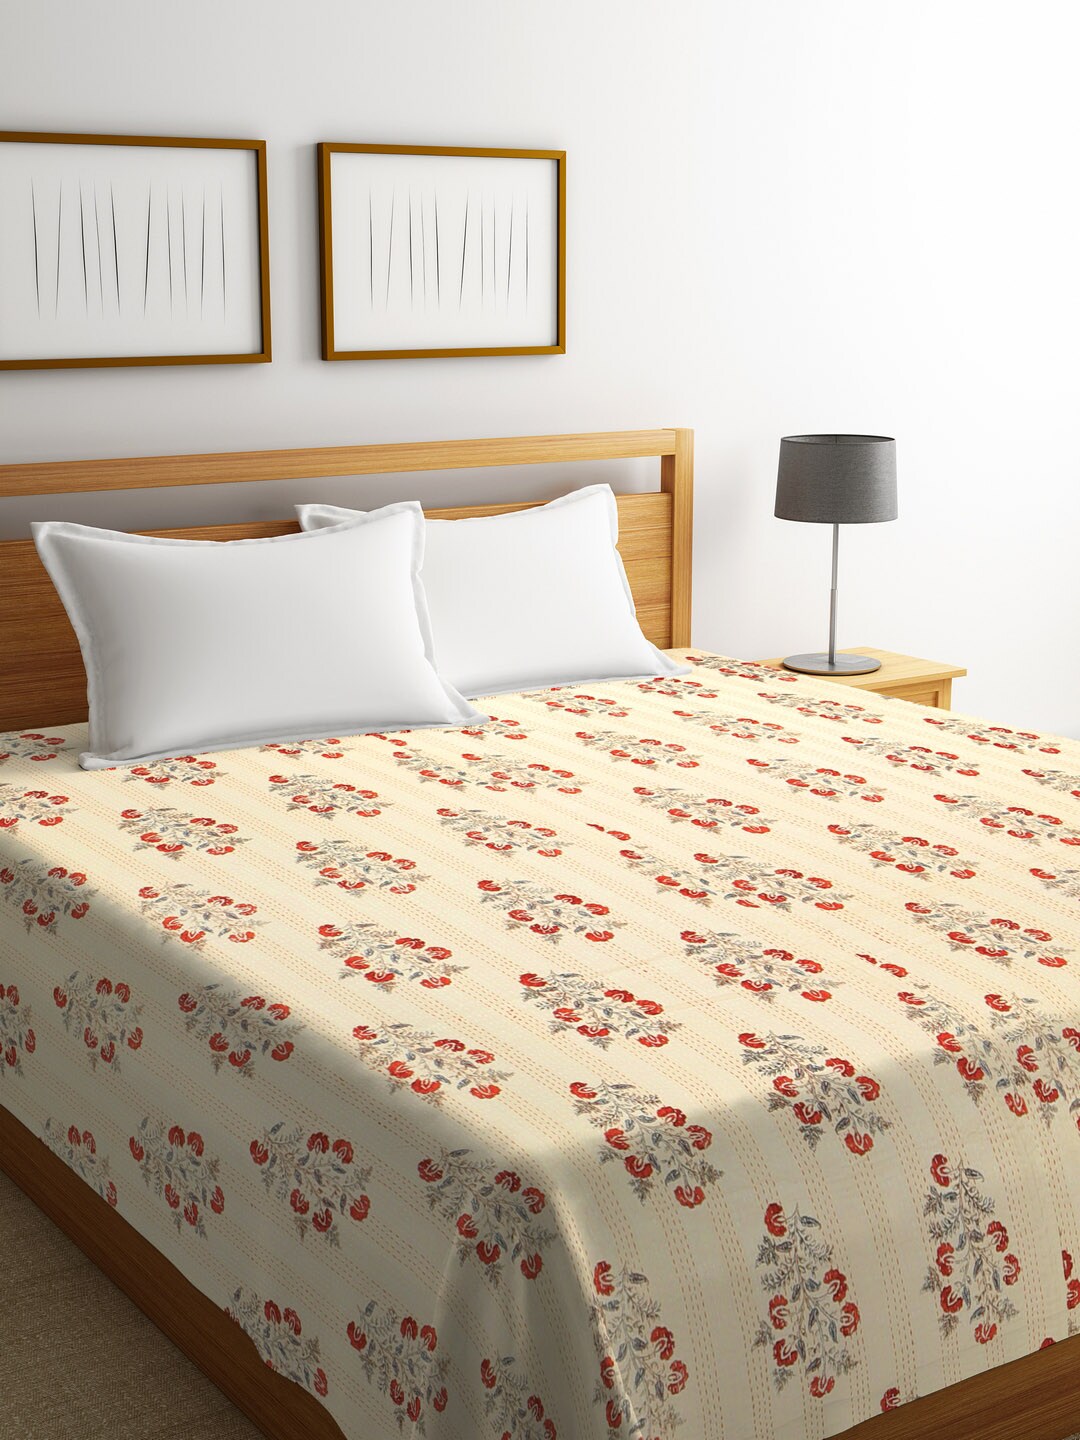 Rajasthan Decor Cream & Red Floral Screen Print Kantha Work Cotton Double Bed Cover Price in India